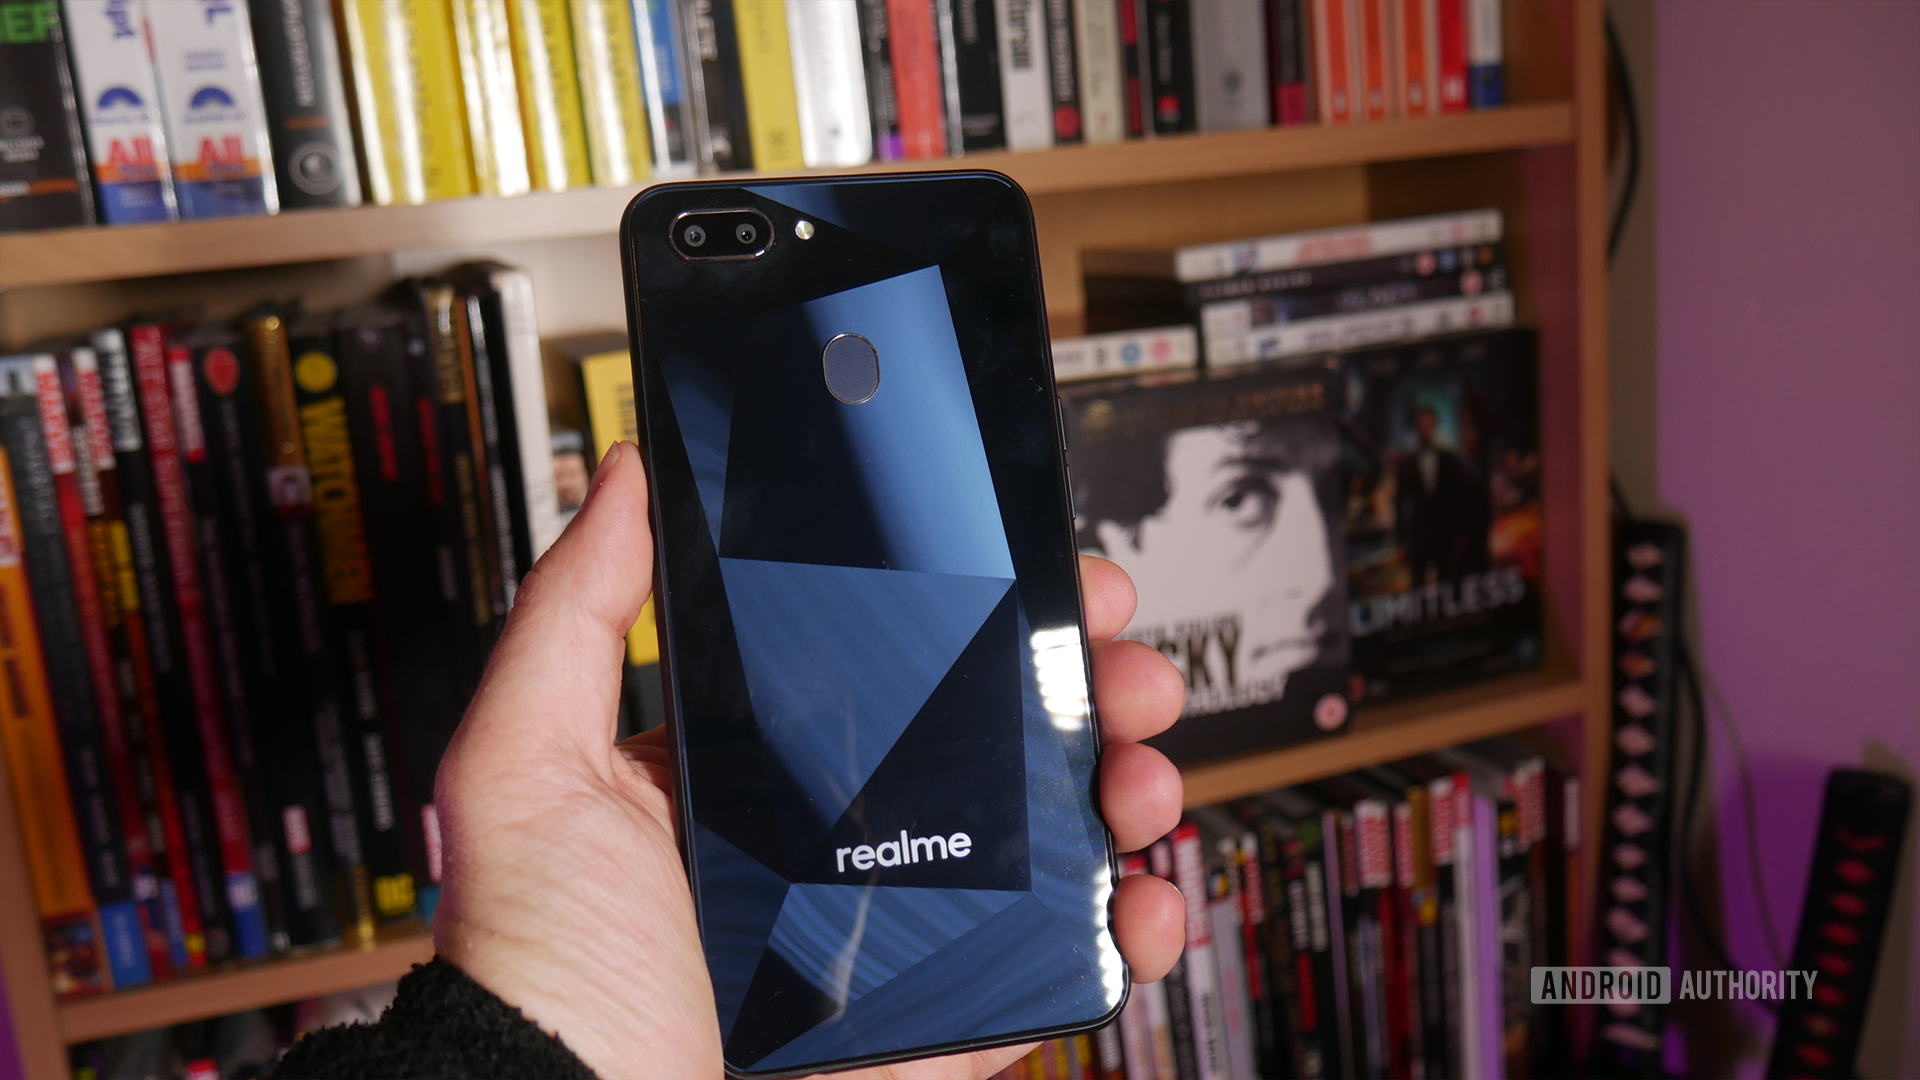 A look at the back of the realme 2.